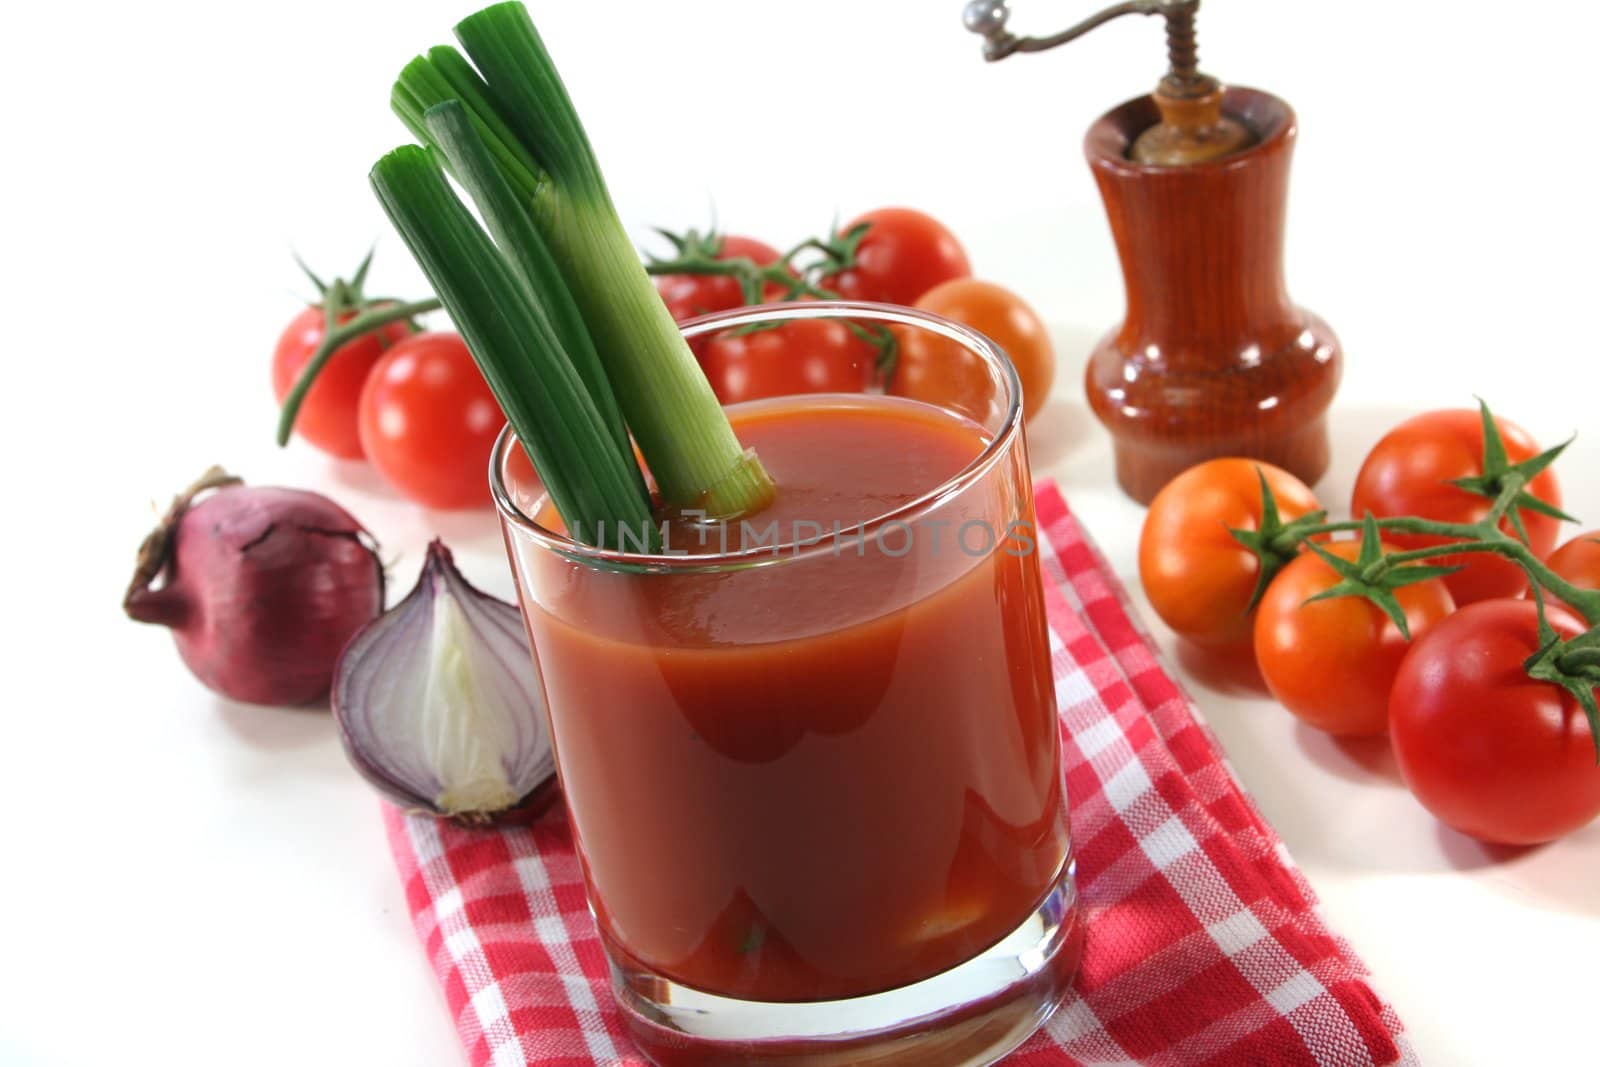 Tomato juice by discovery